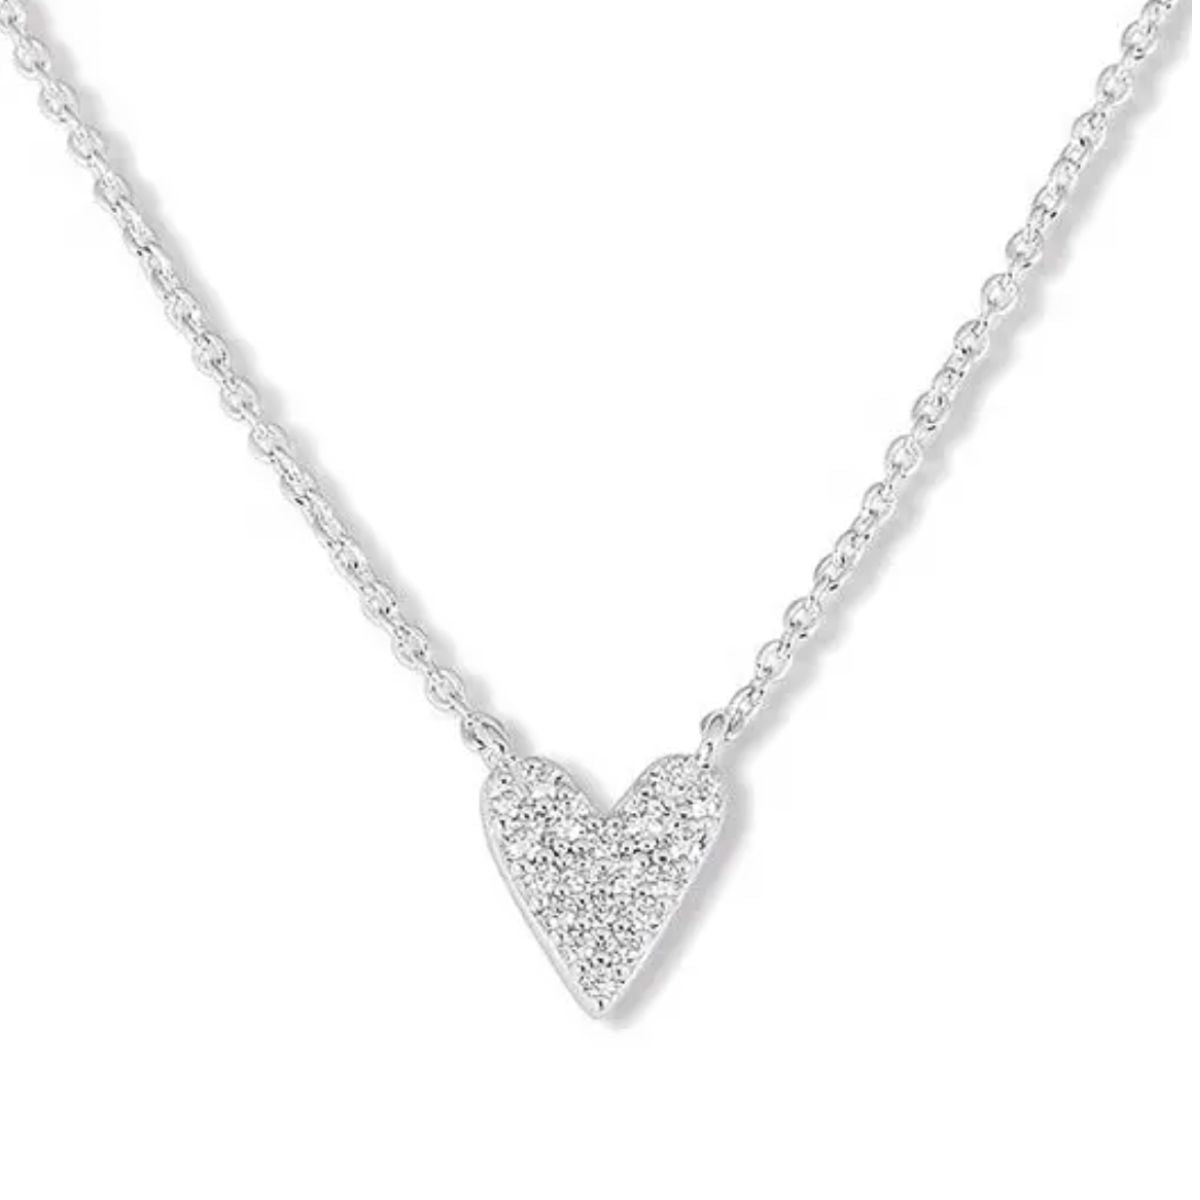  Featherly adjustable cubic zirconia heart necklace in 925 sterling silver 